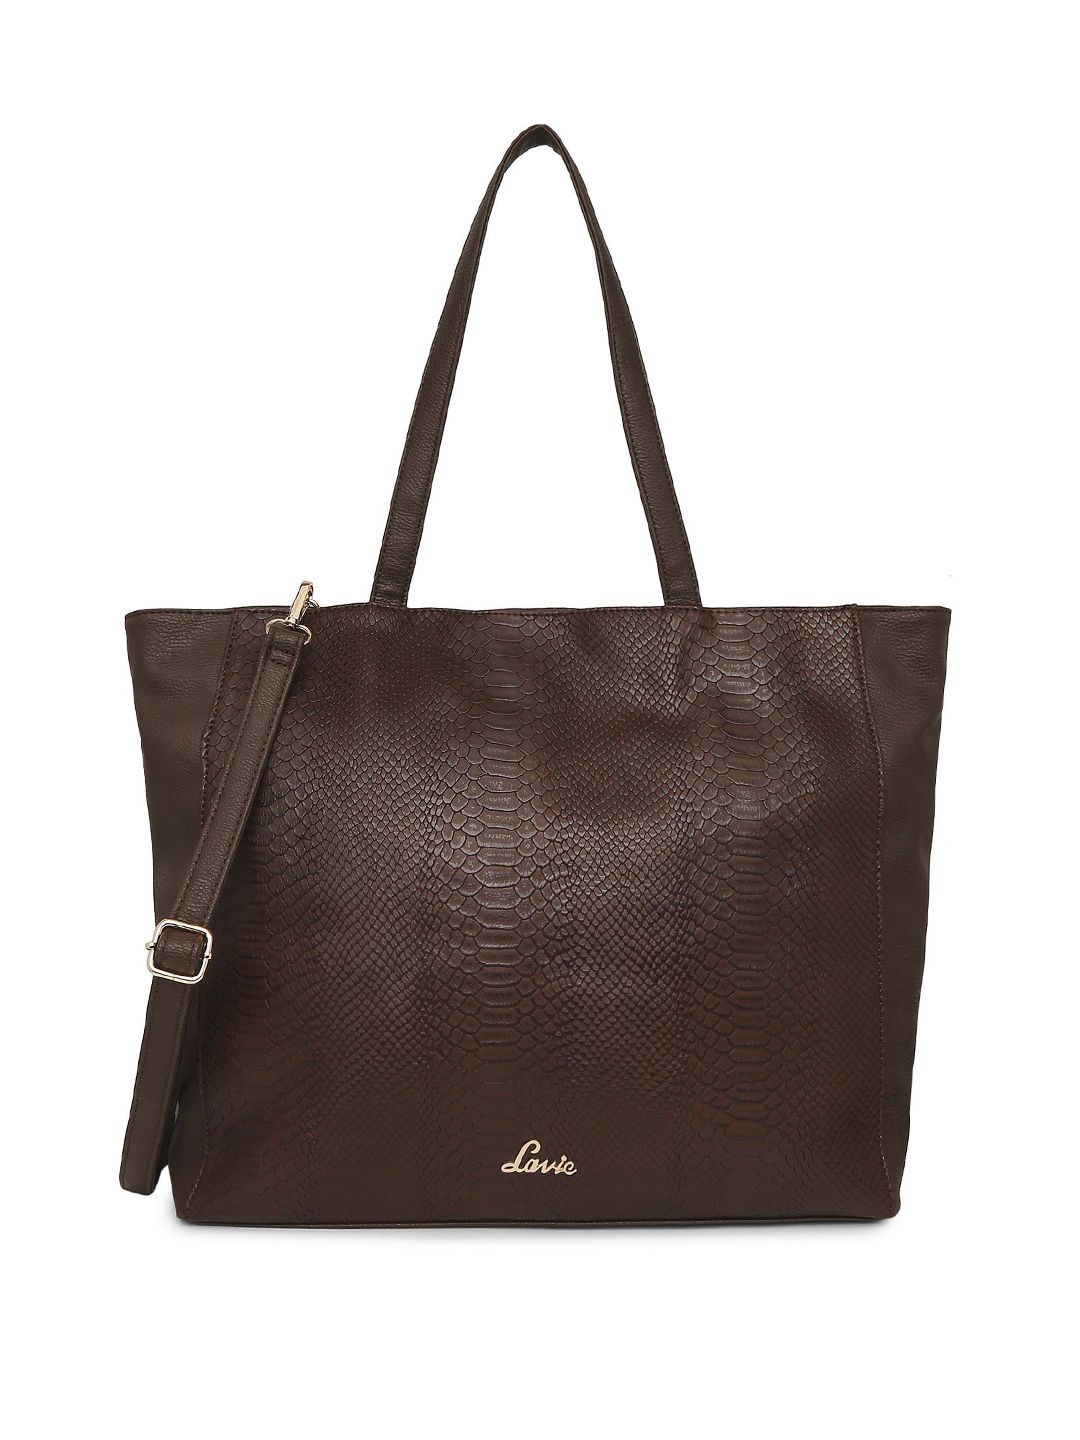 Lavie Coffee Brown Snakeskin Textured Laptop Shoulder Bag with Detachable Sling Strap Price in India